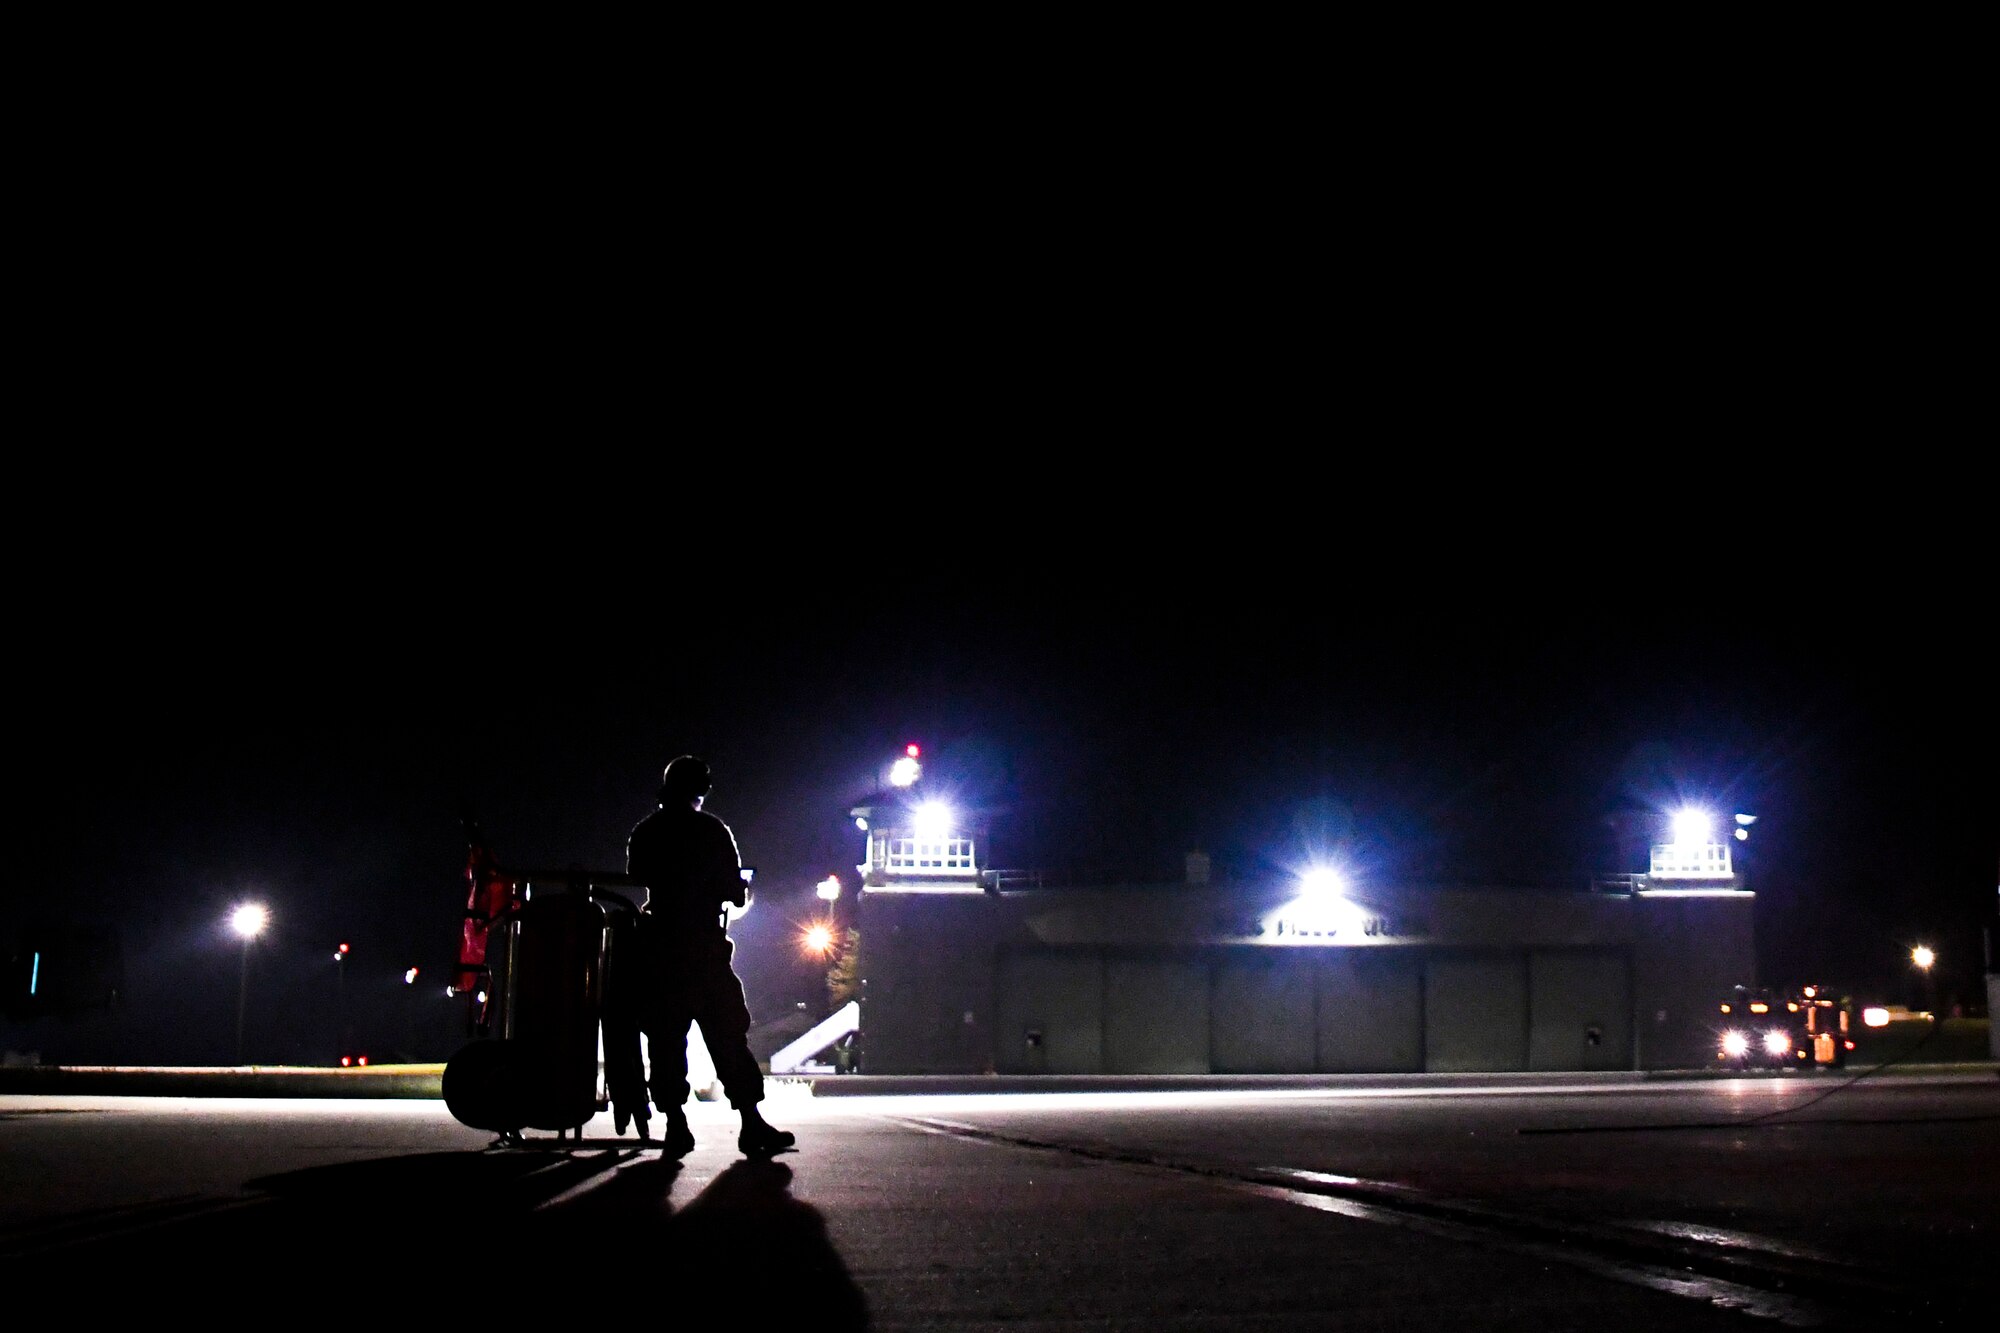 A photo of an airmen standing on the flight line at night